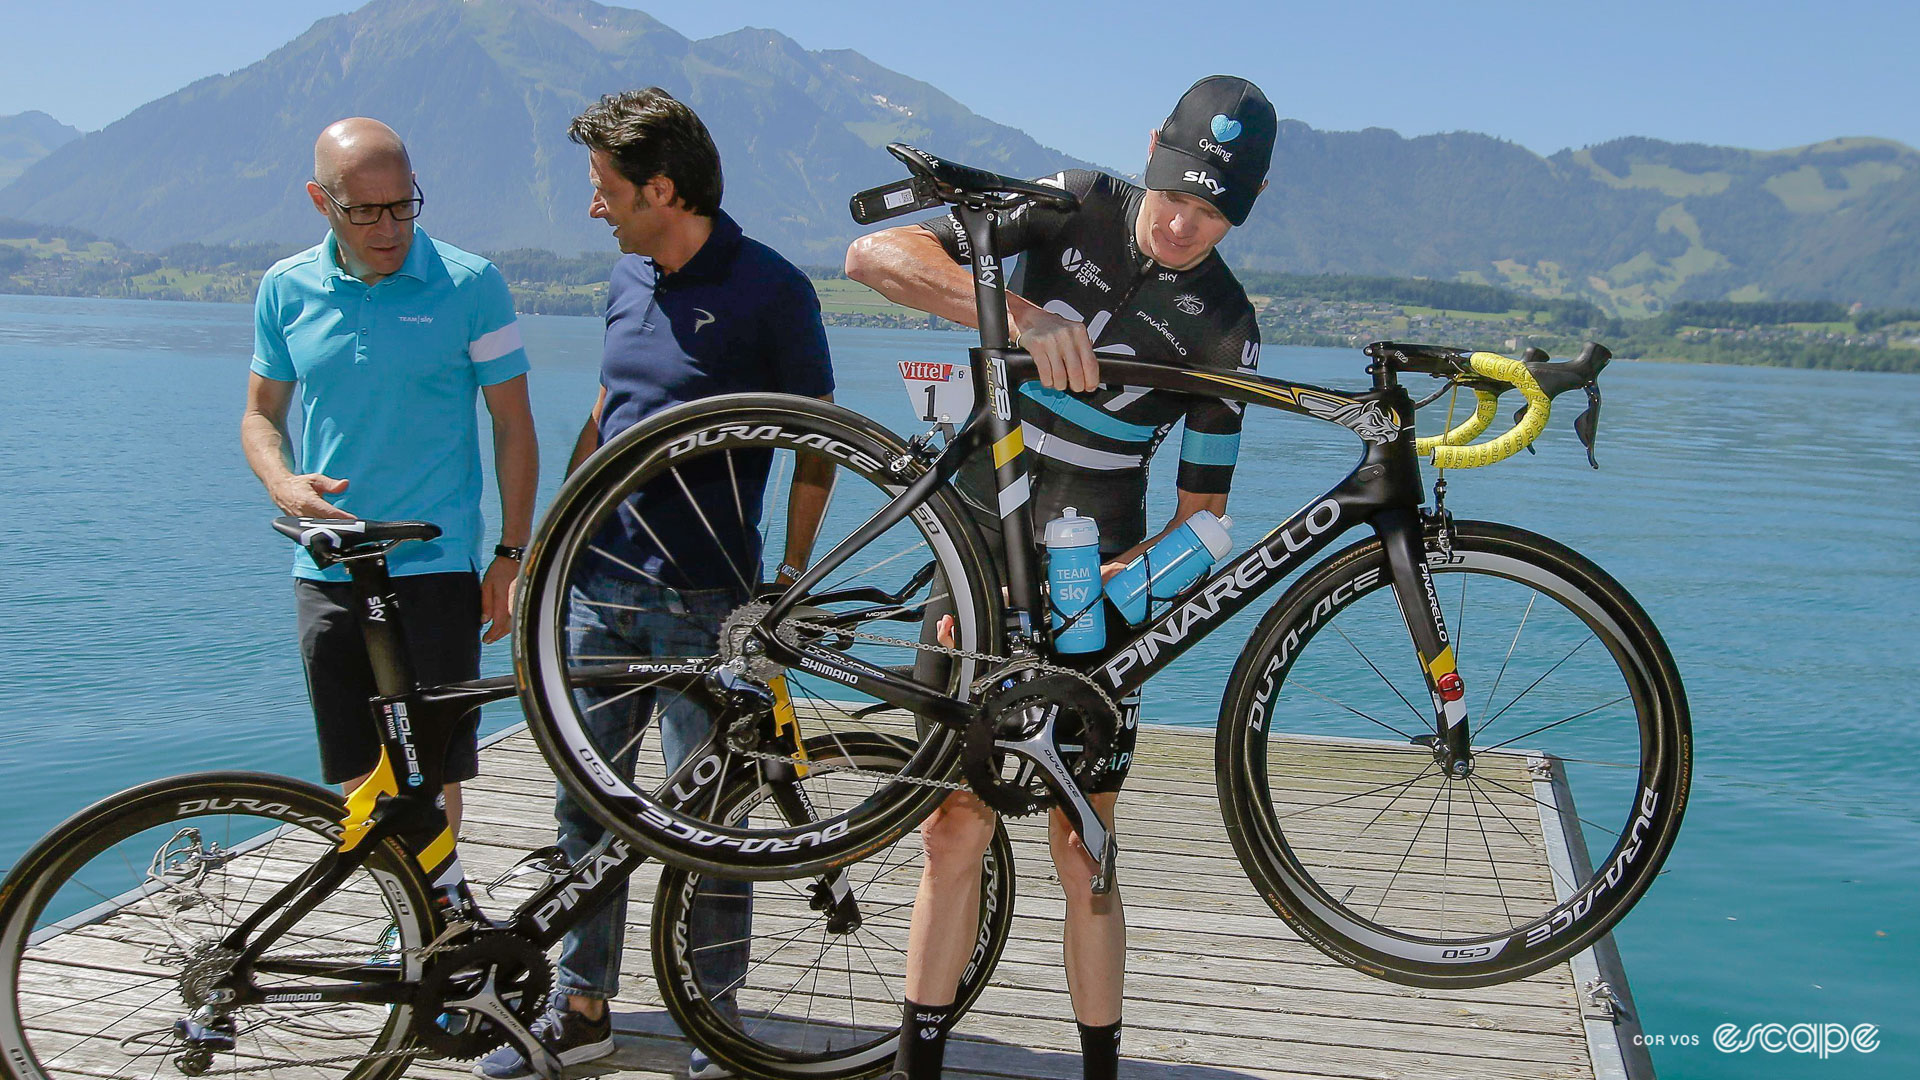 The photo shows Chris Froome standing on a small wooden boat dock holding up his Pinarello F8 with Sir Dave Brailsford and Fausto Pinarello to his right.